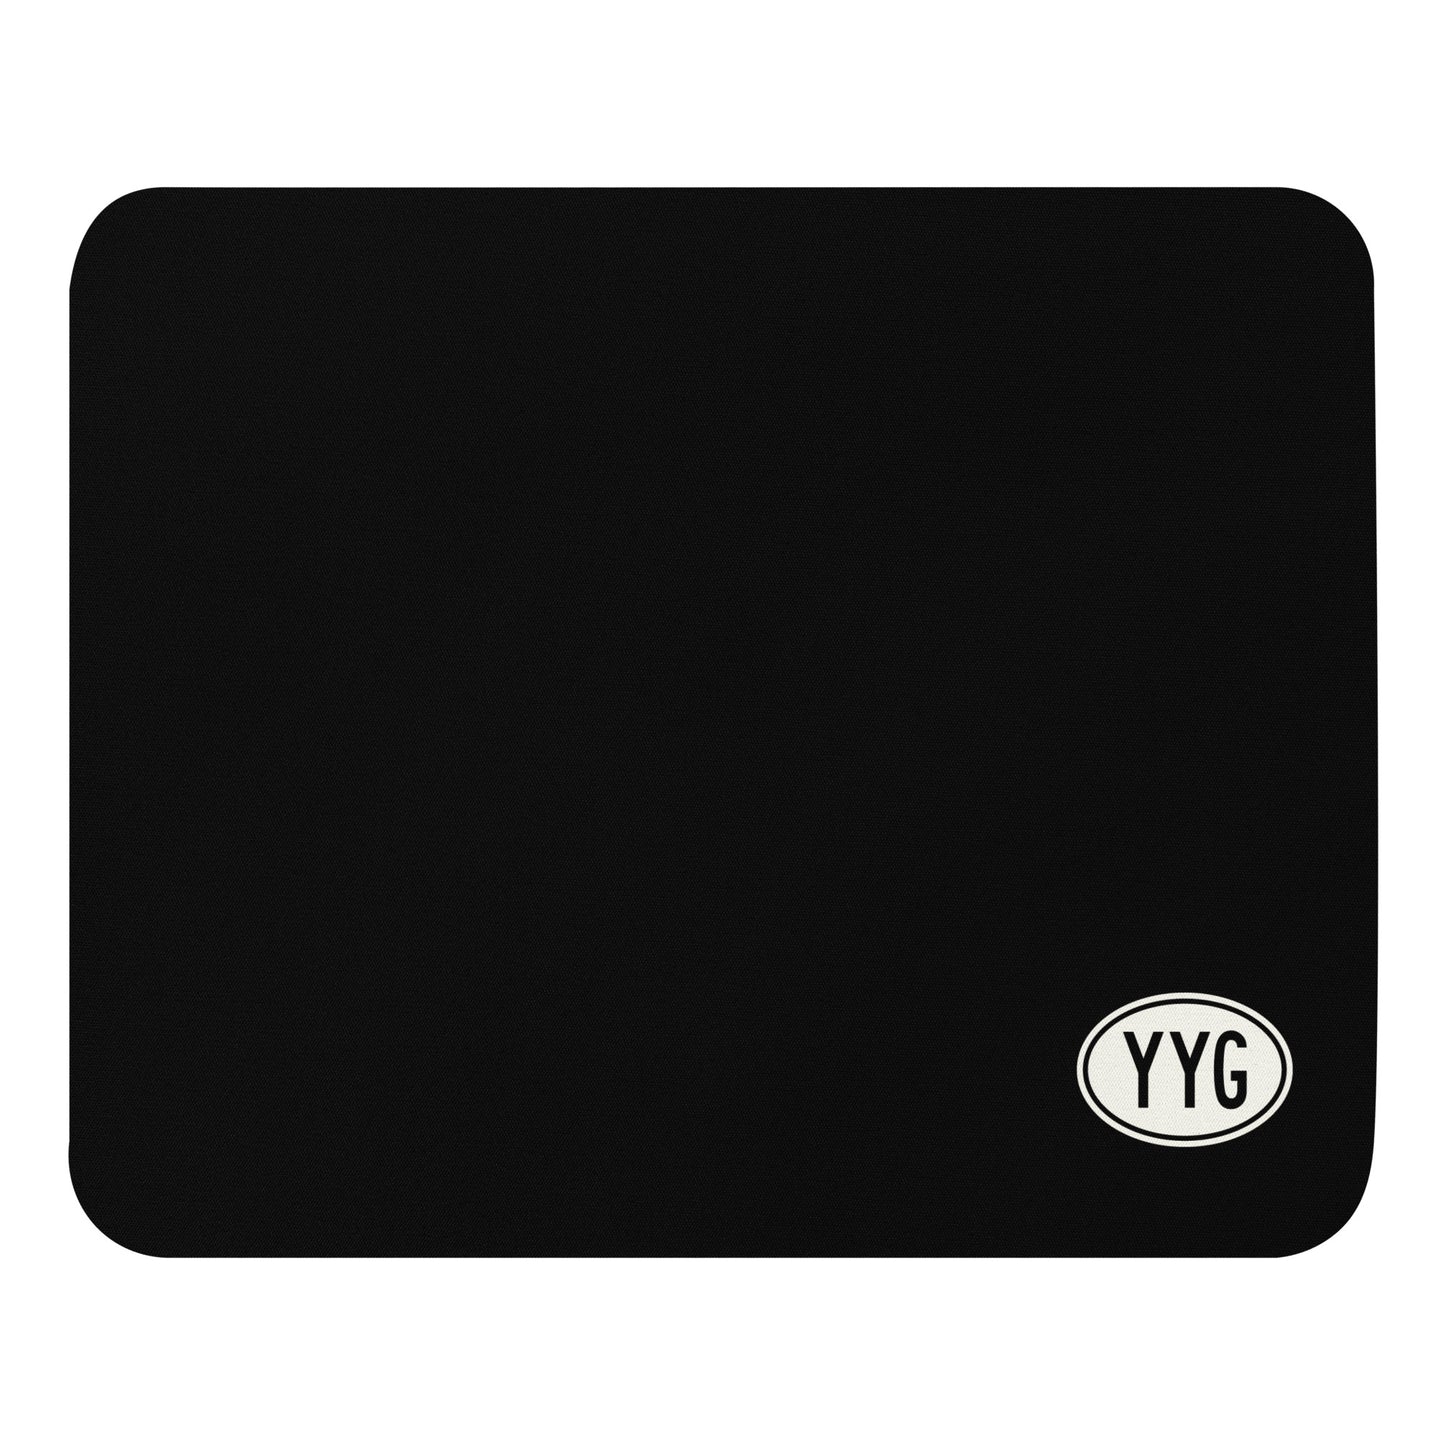 Unique Travel Gift Mouse Pad - White Oval • YYG Charlottetown • YHM Designs - Image 01